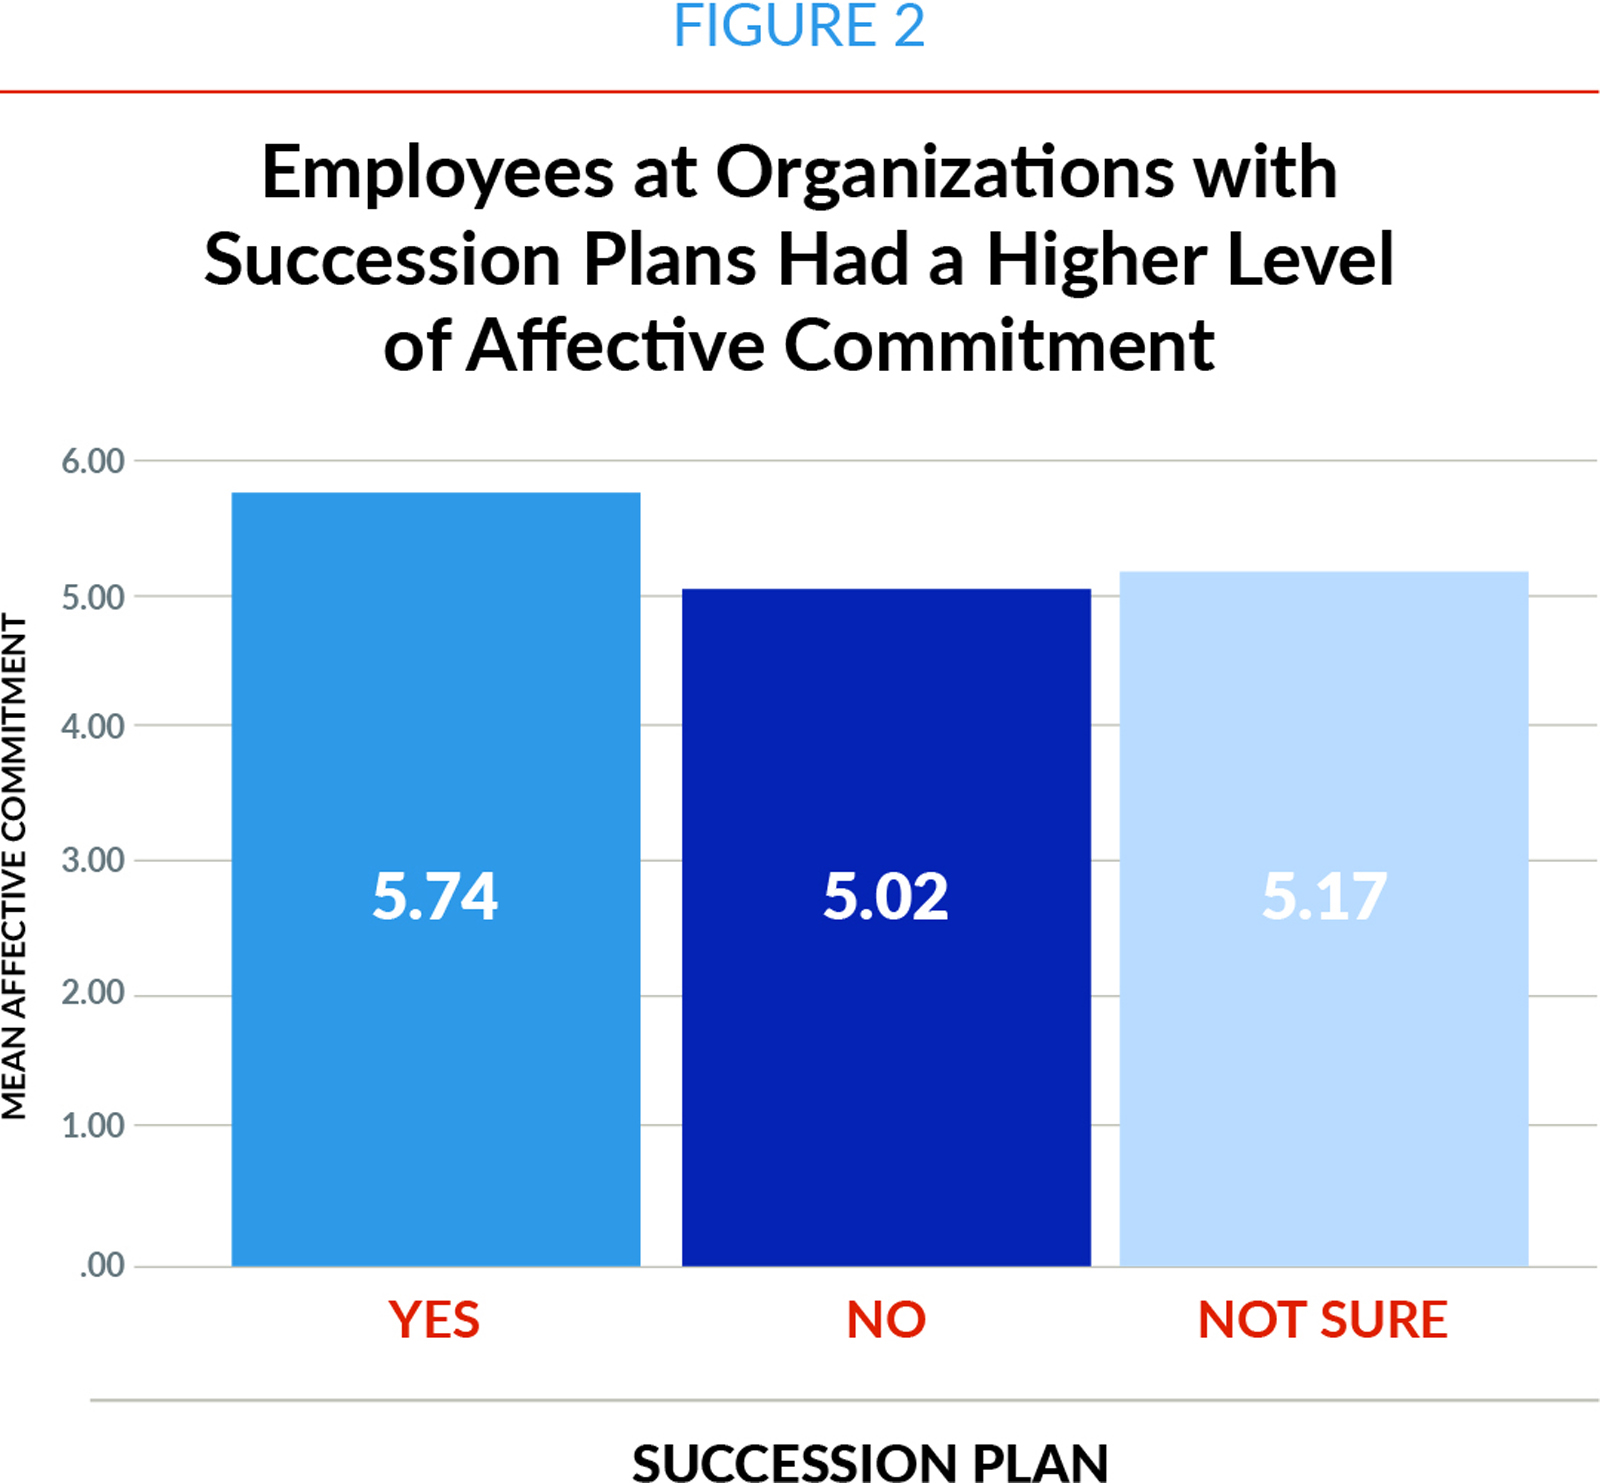 Chart showing employees at organizations with succession plans had a higher level of affective commitment